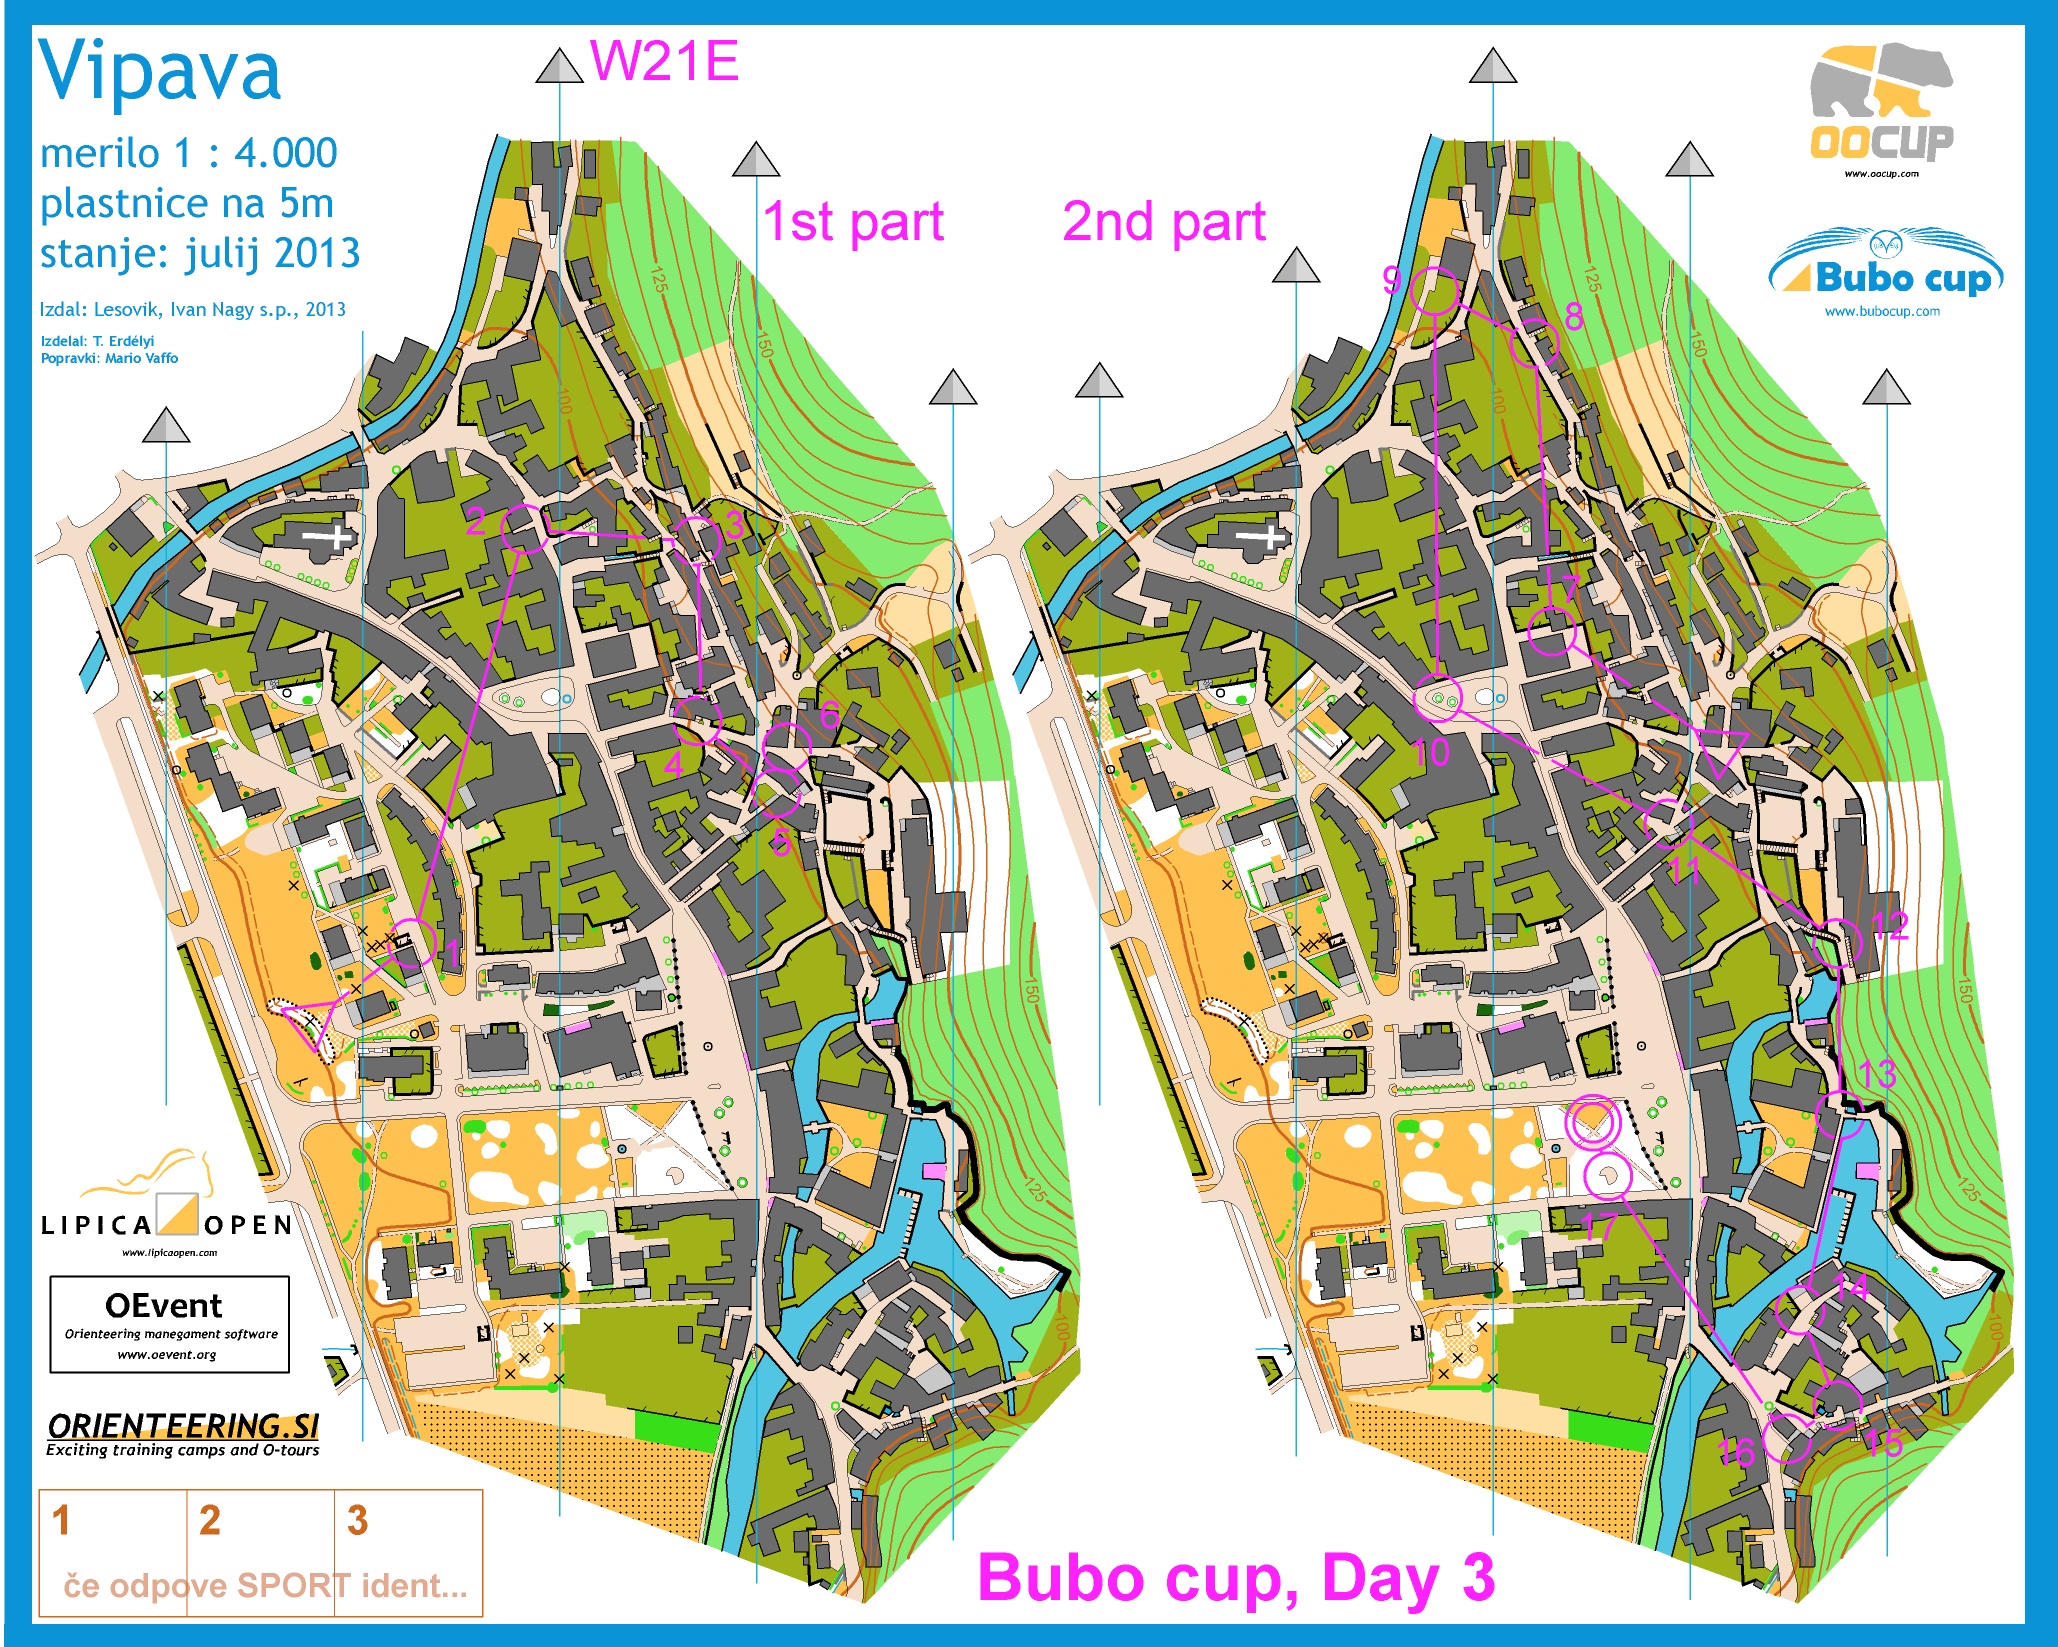 Bubo cup Stage 3, W21E (19-07-2013)